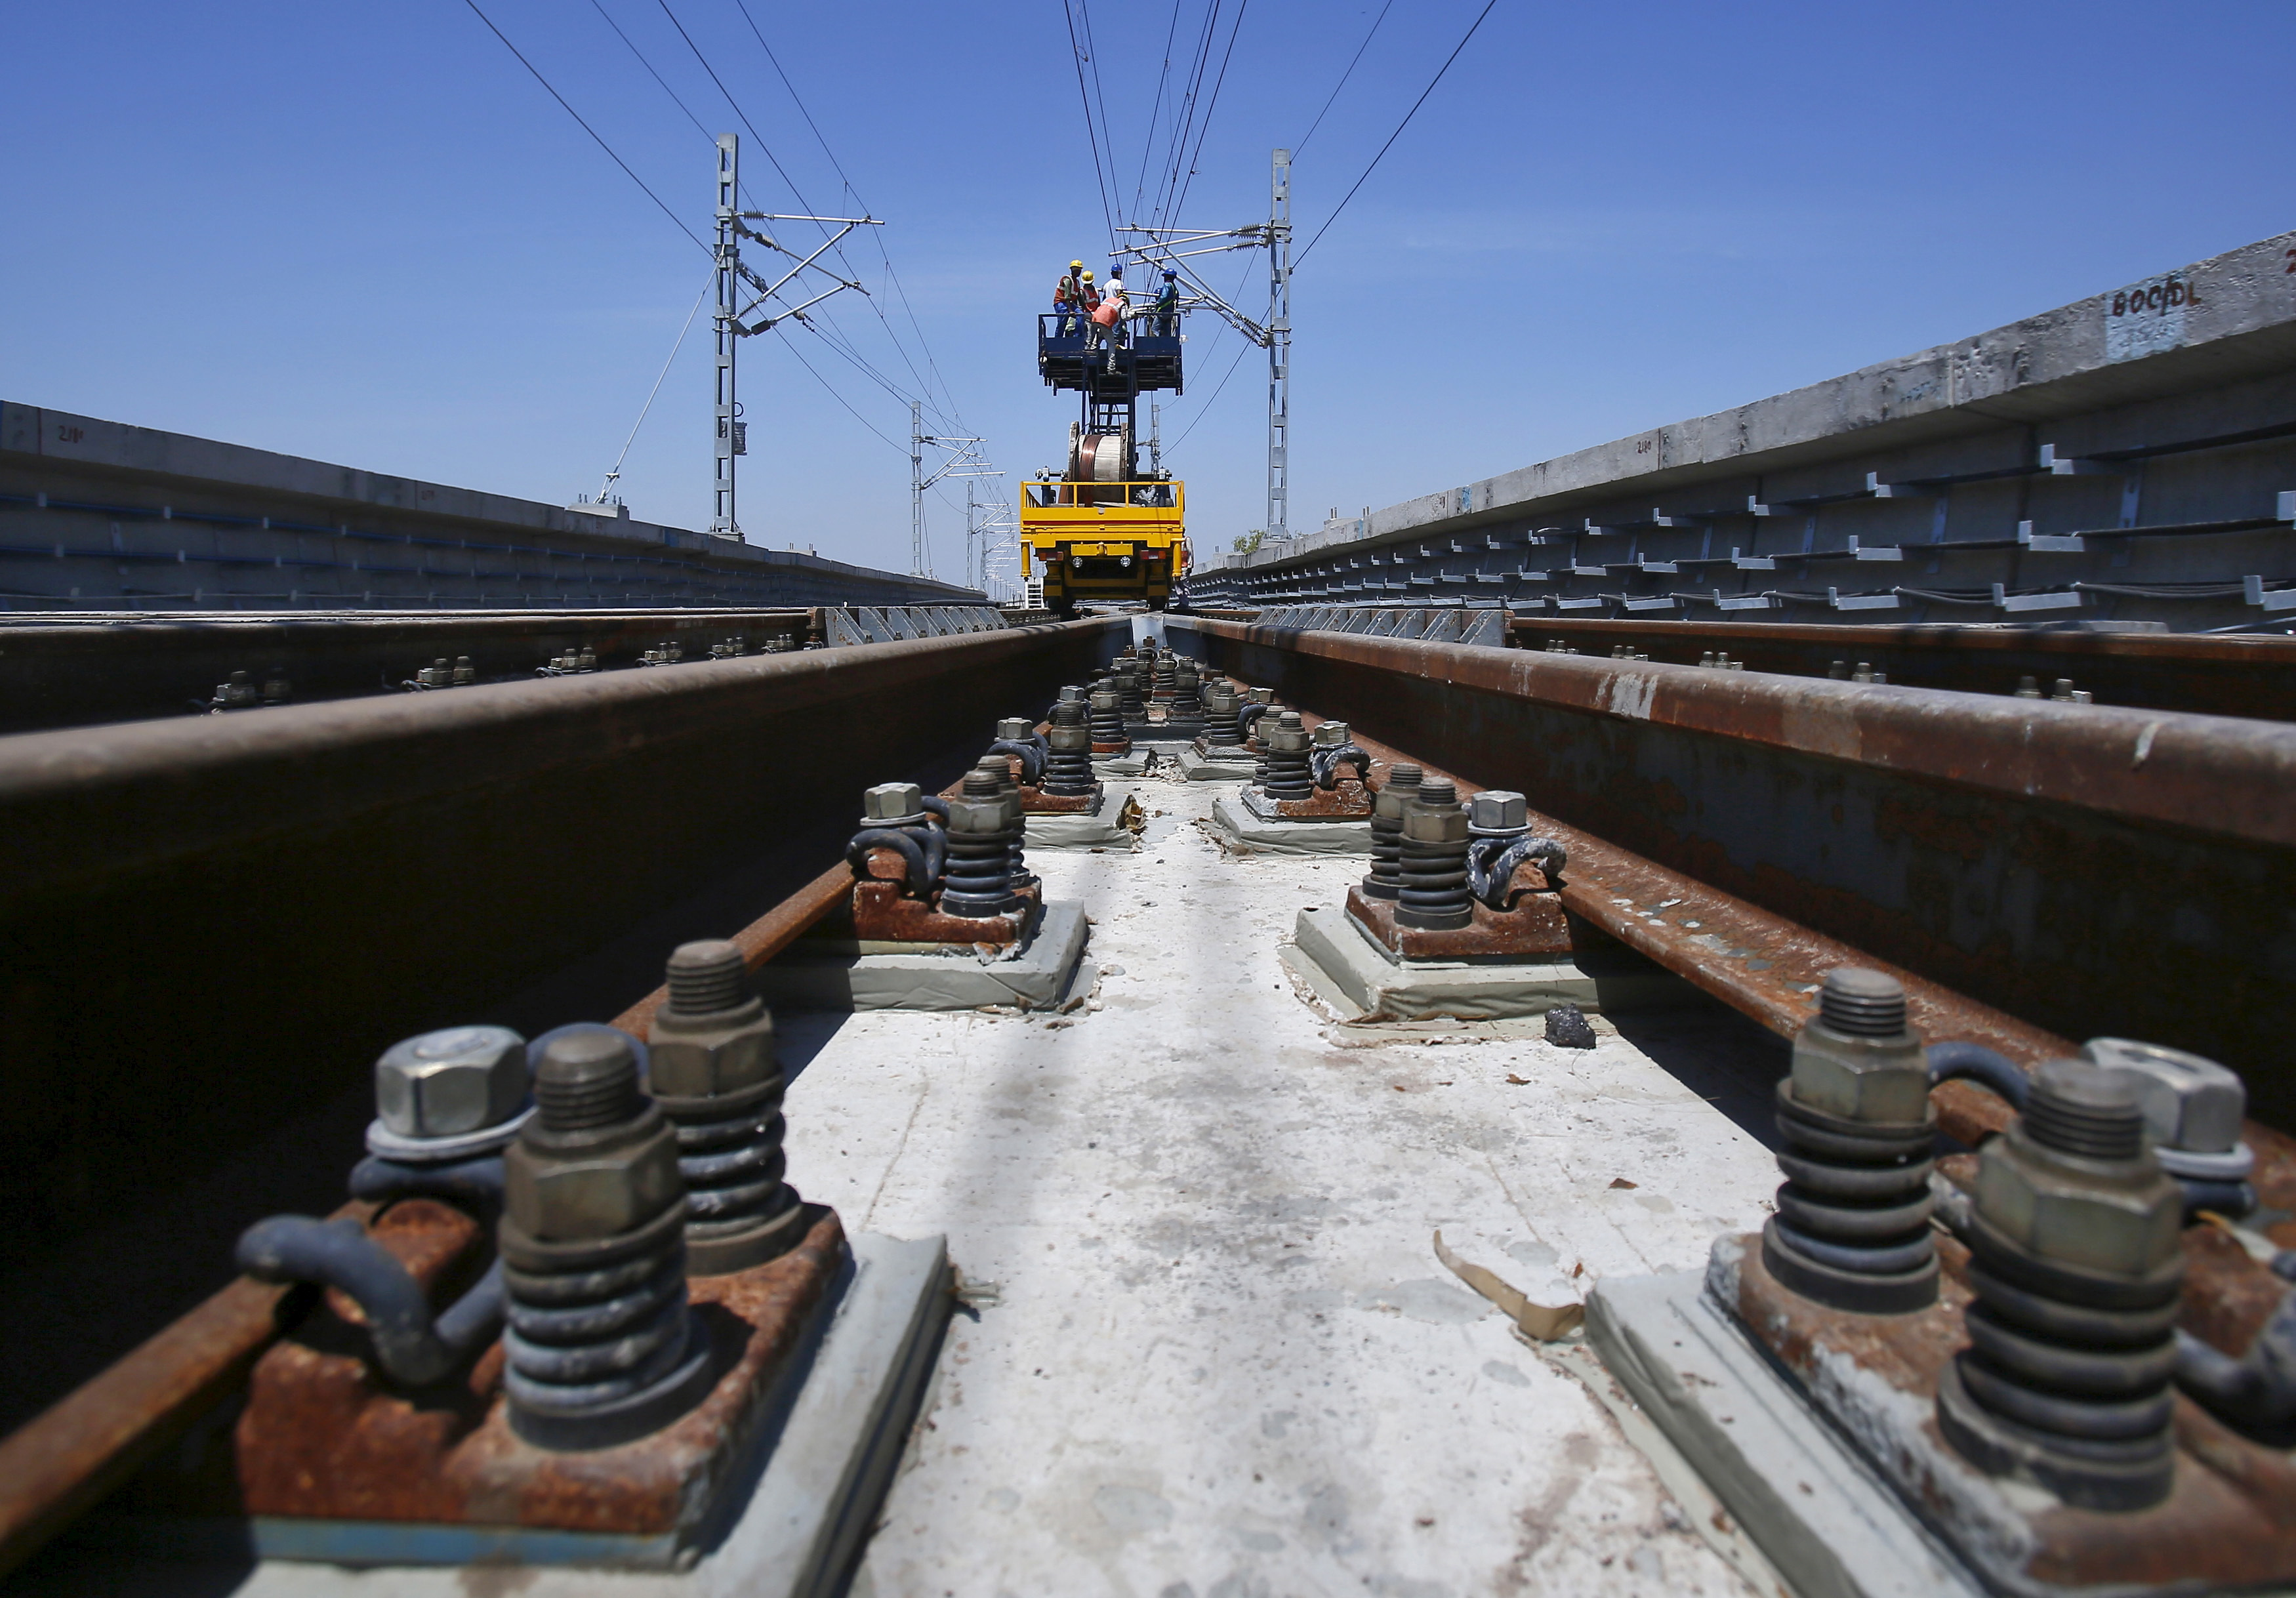 DMRC workers install copper wires at the construction site of Ajronda station, outskirts of New Delhi